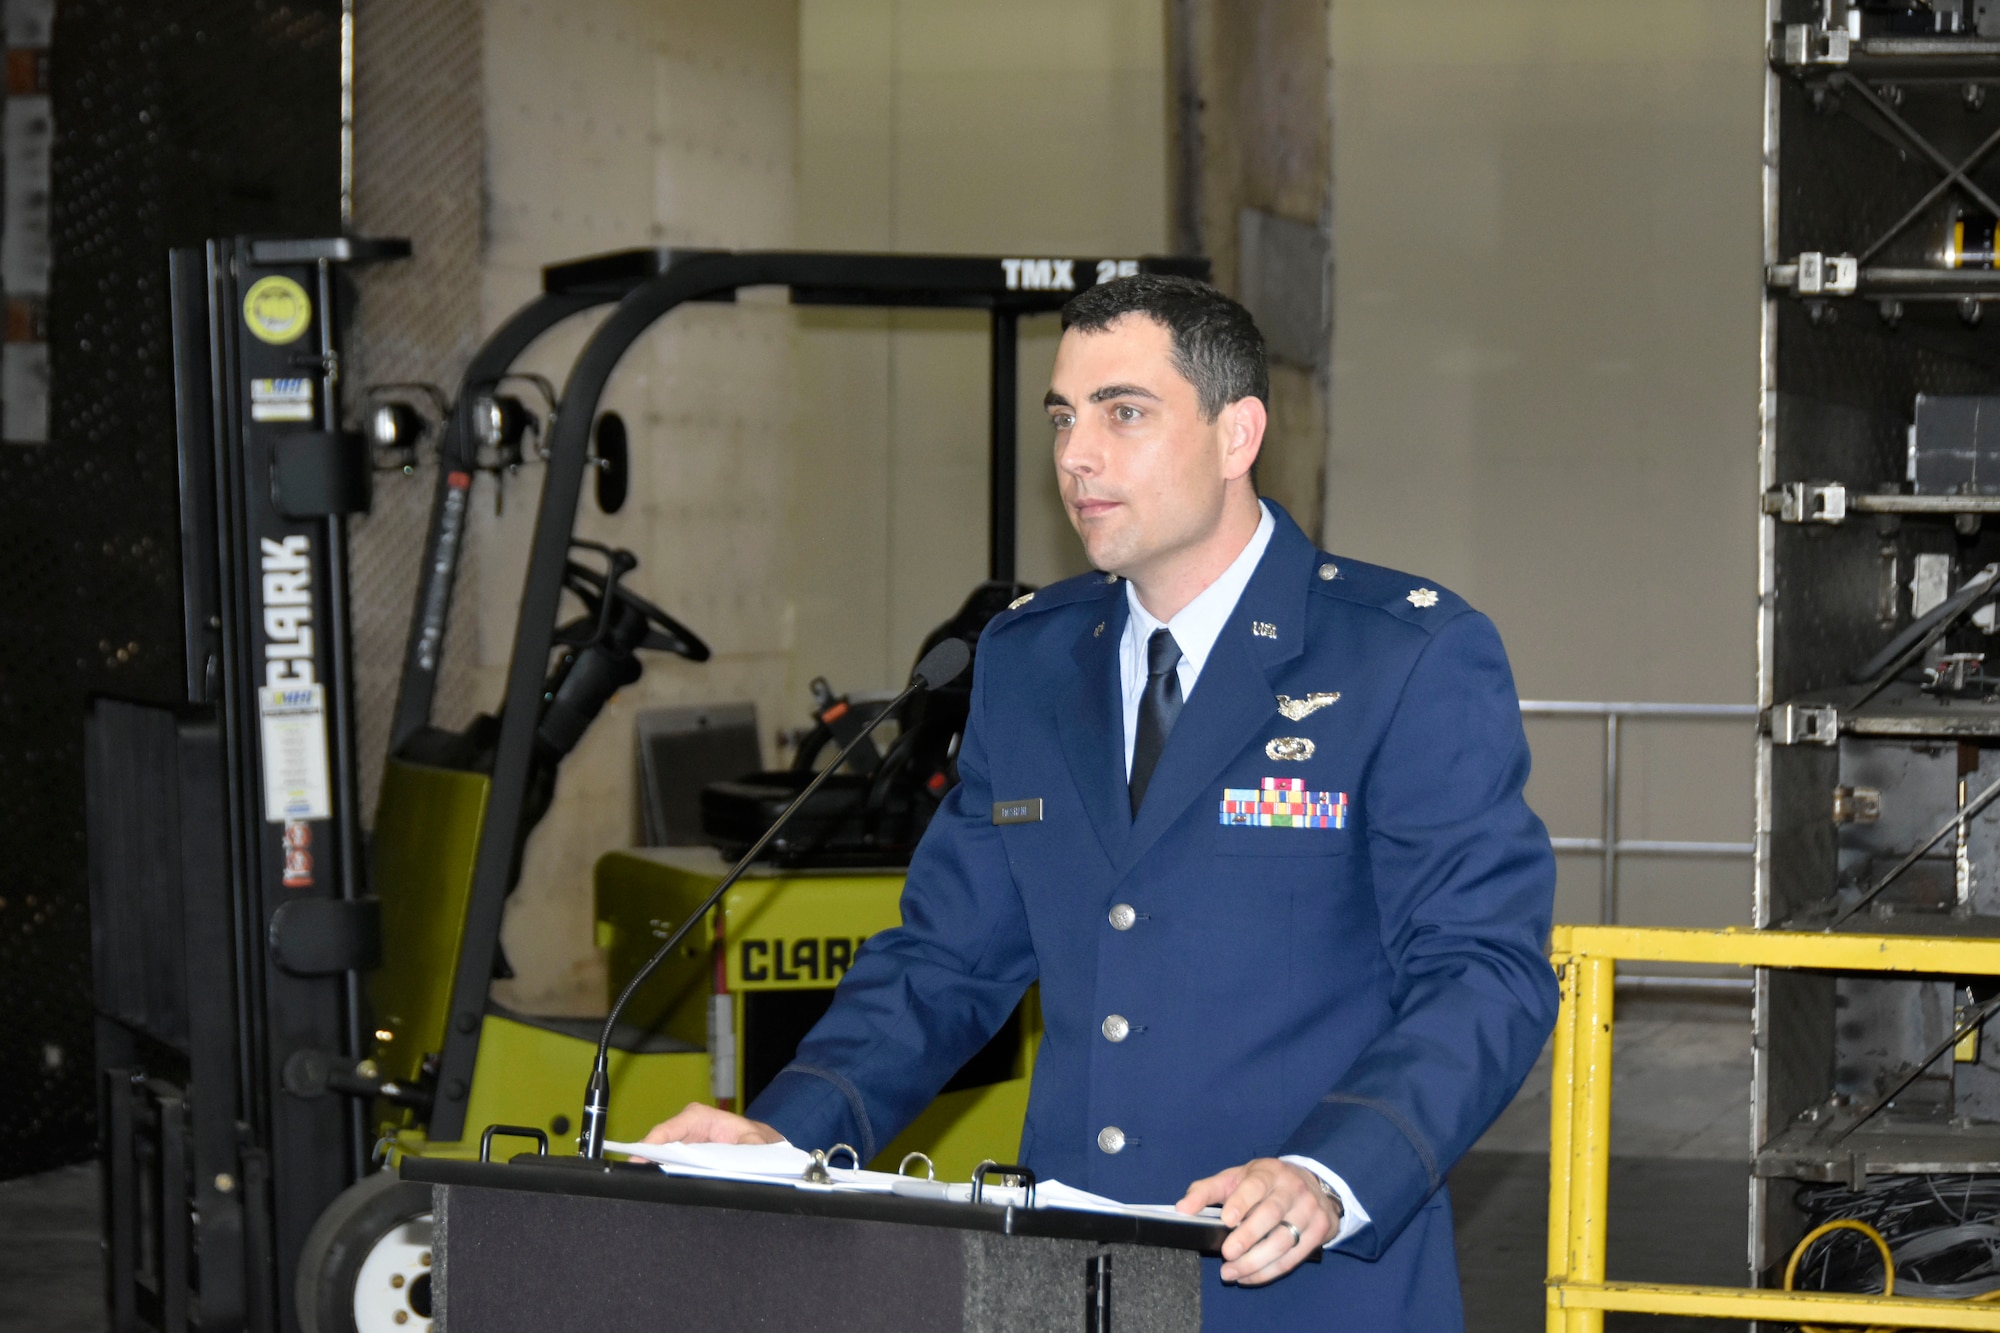 After accepting the guidon as the new AEDC Flight Systems Commander, Lt. Col. John McShane, addresses those in attendance at his Change of Leadership ceremony June 28. Before coming to Arnold, McShane previously served as Program Element Monitor for Advanced Aircraft Technology at the Directorate of Special Programs, Assistant Secretary of the Air Force at the Pentagon in Washington, D.C. (U.S. Air Force photo by Bradley Hicks)